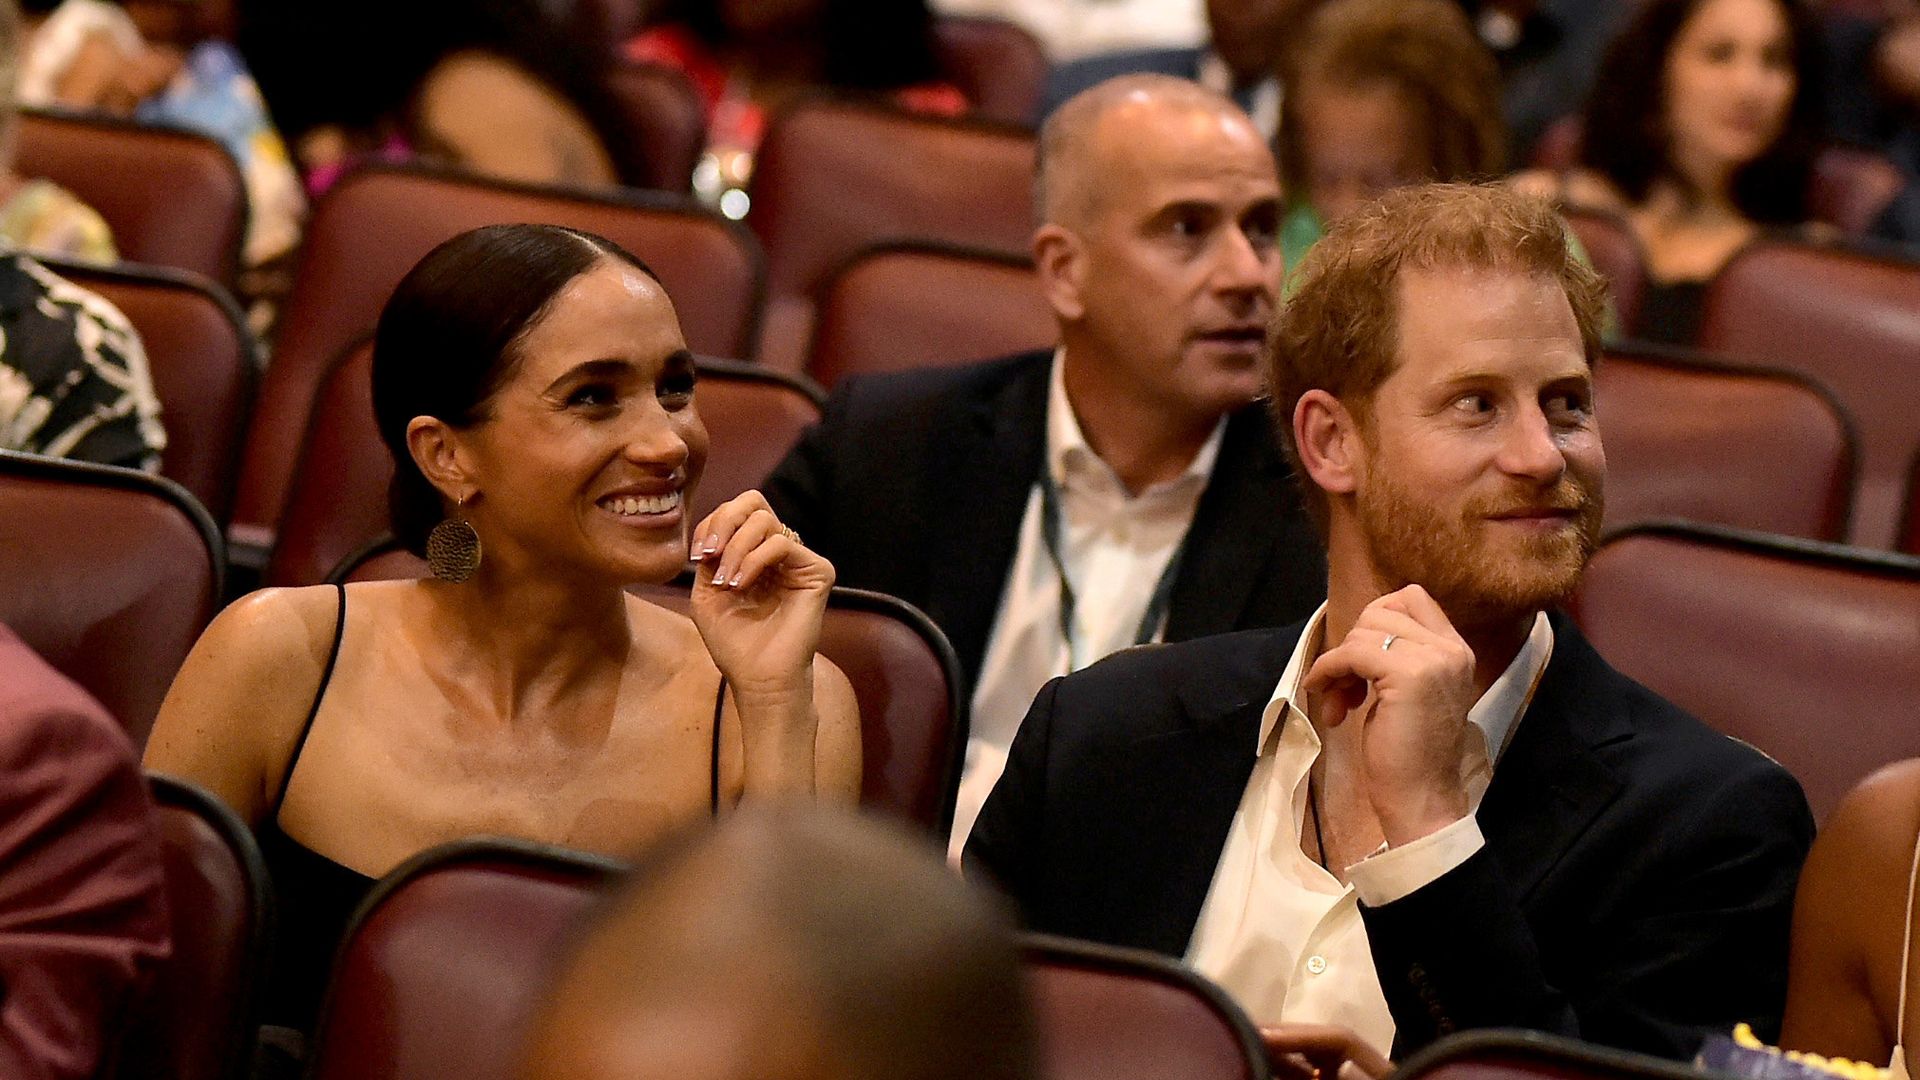 Meghan Markle and Prince Harry sitting in movie chairs